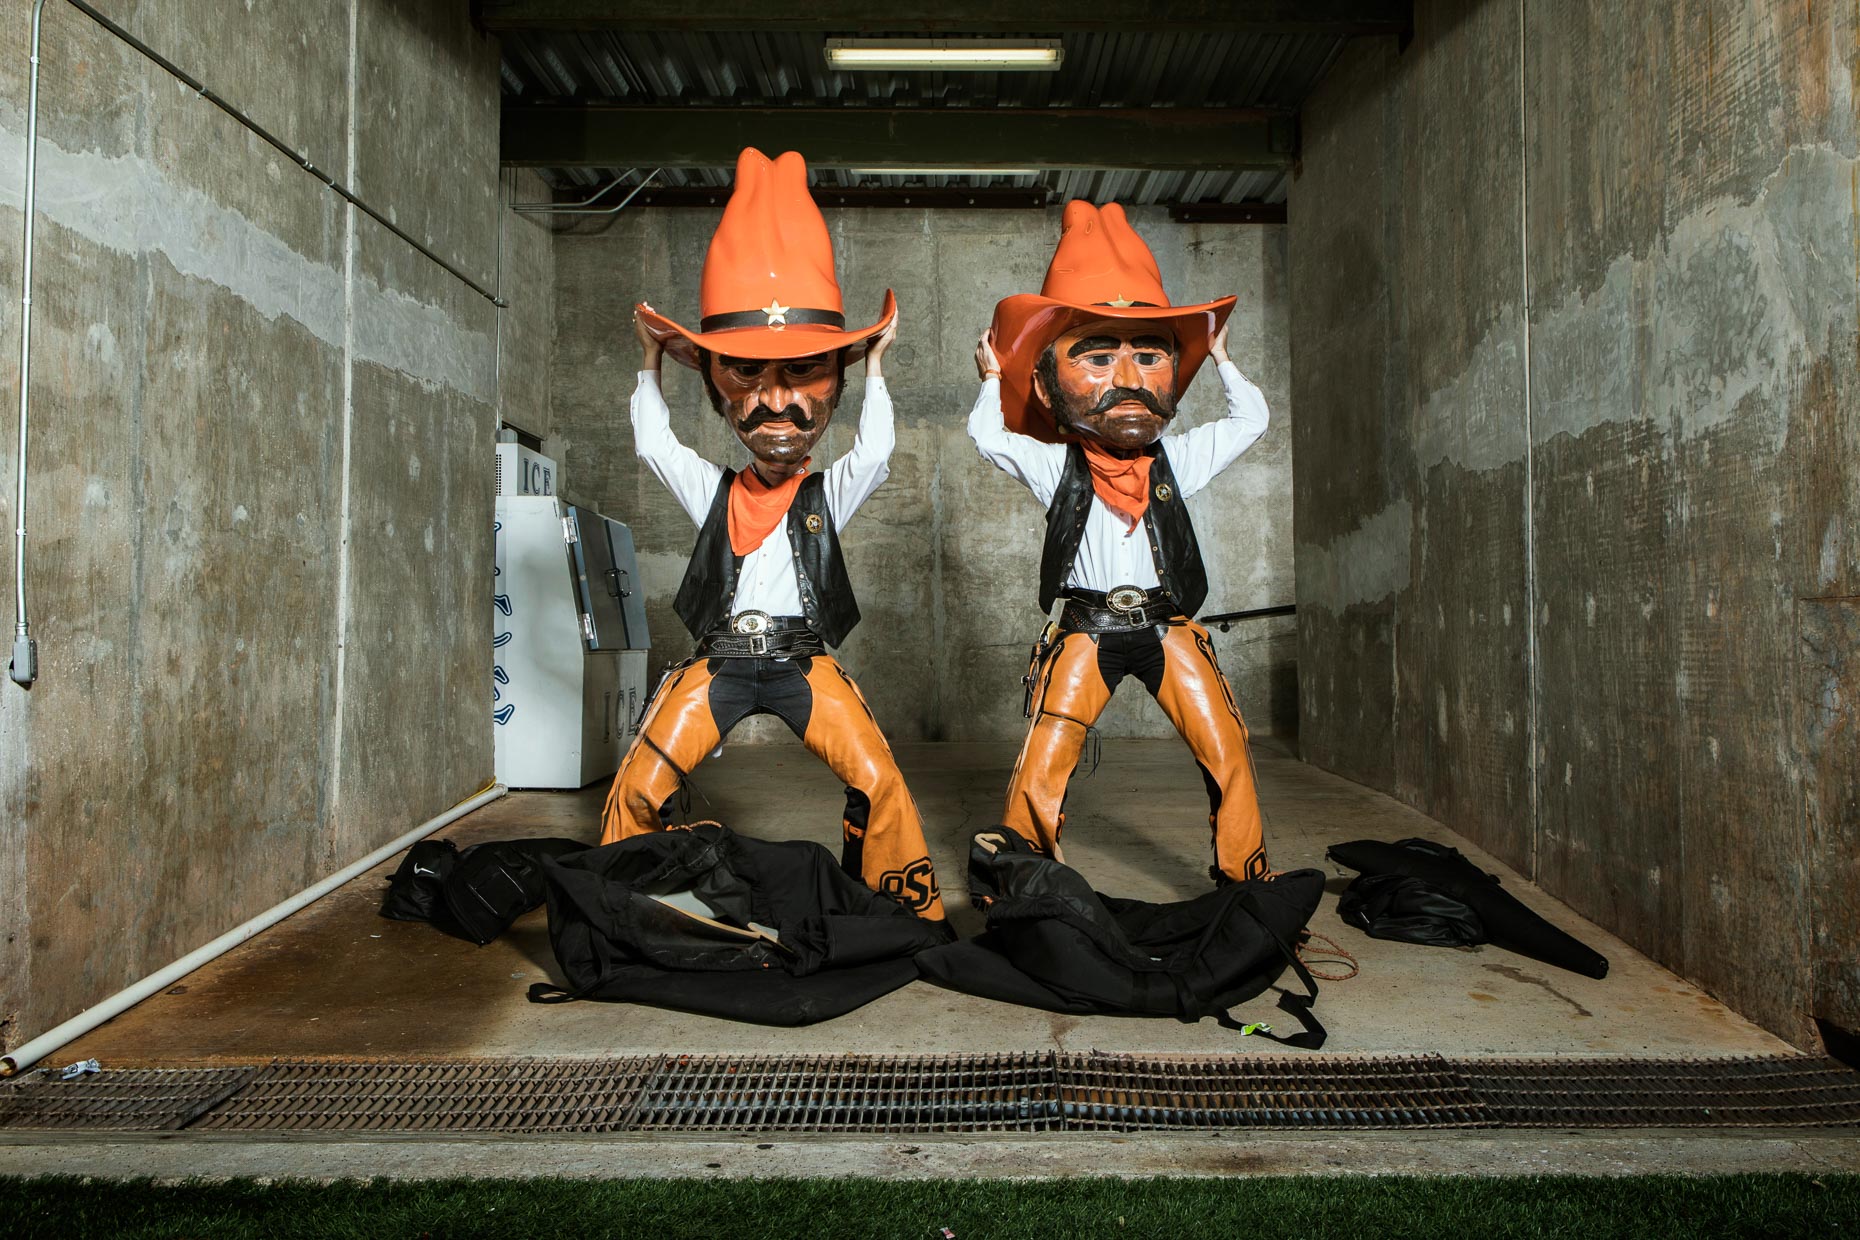 Austin Johnson, left, and Taylor Collins get dressed as Oklahoma State Cowboy